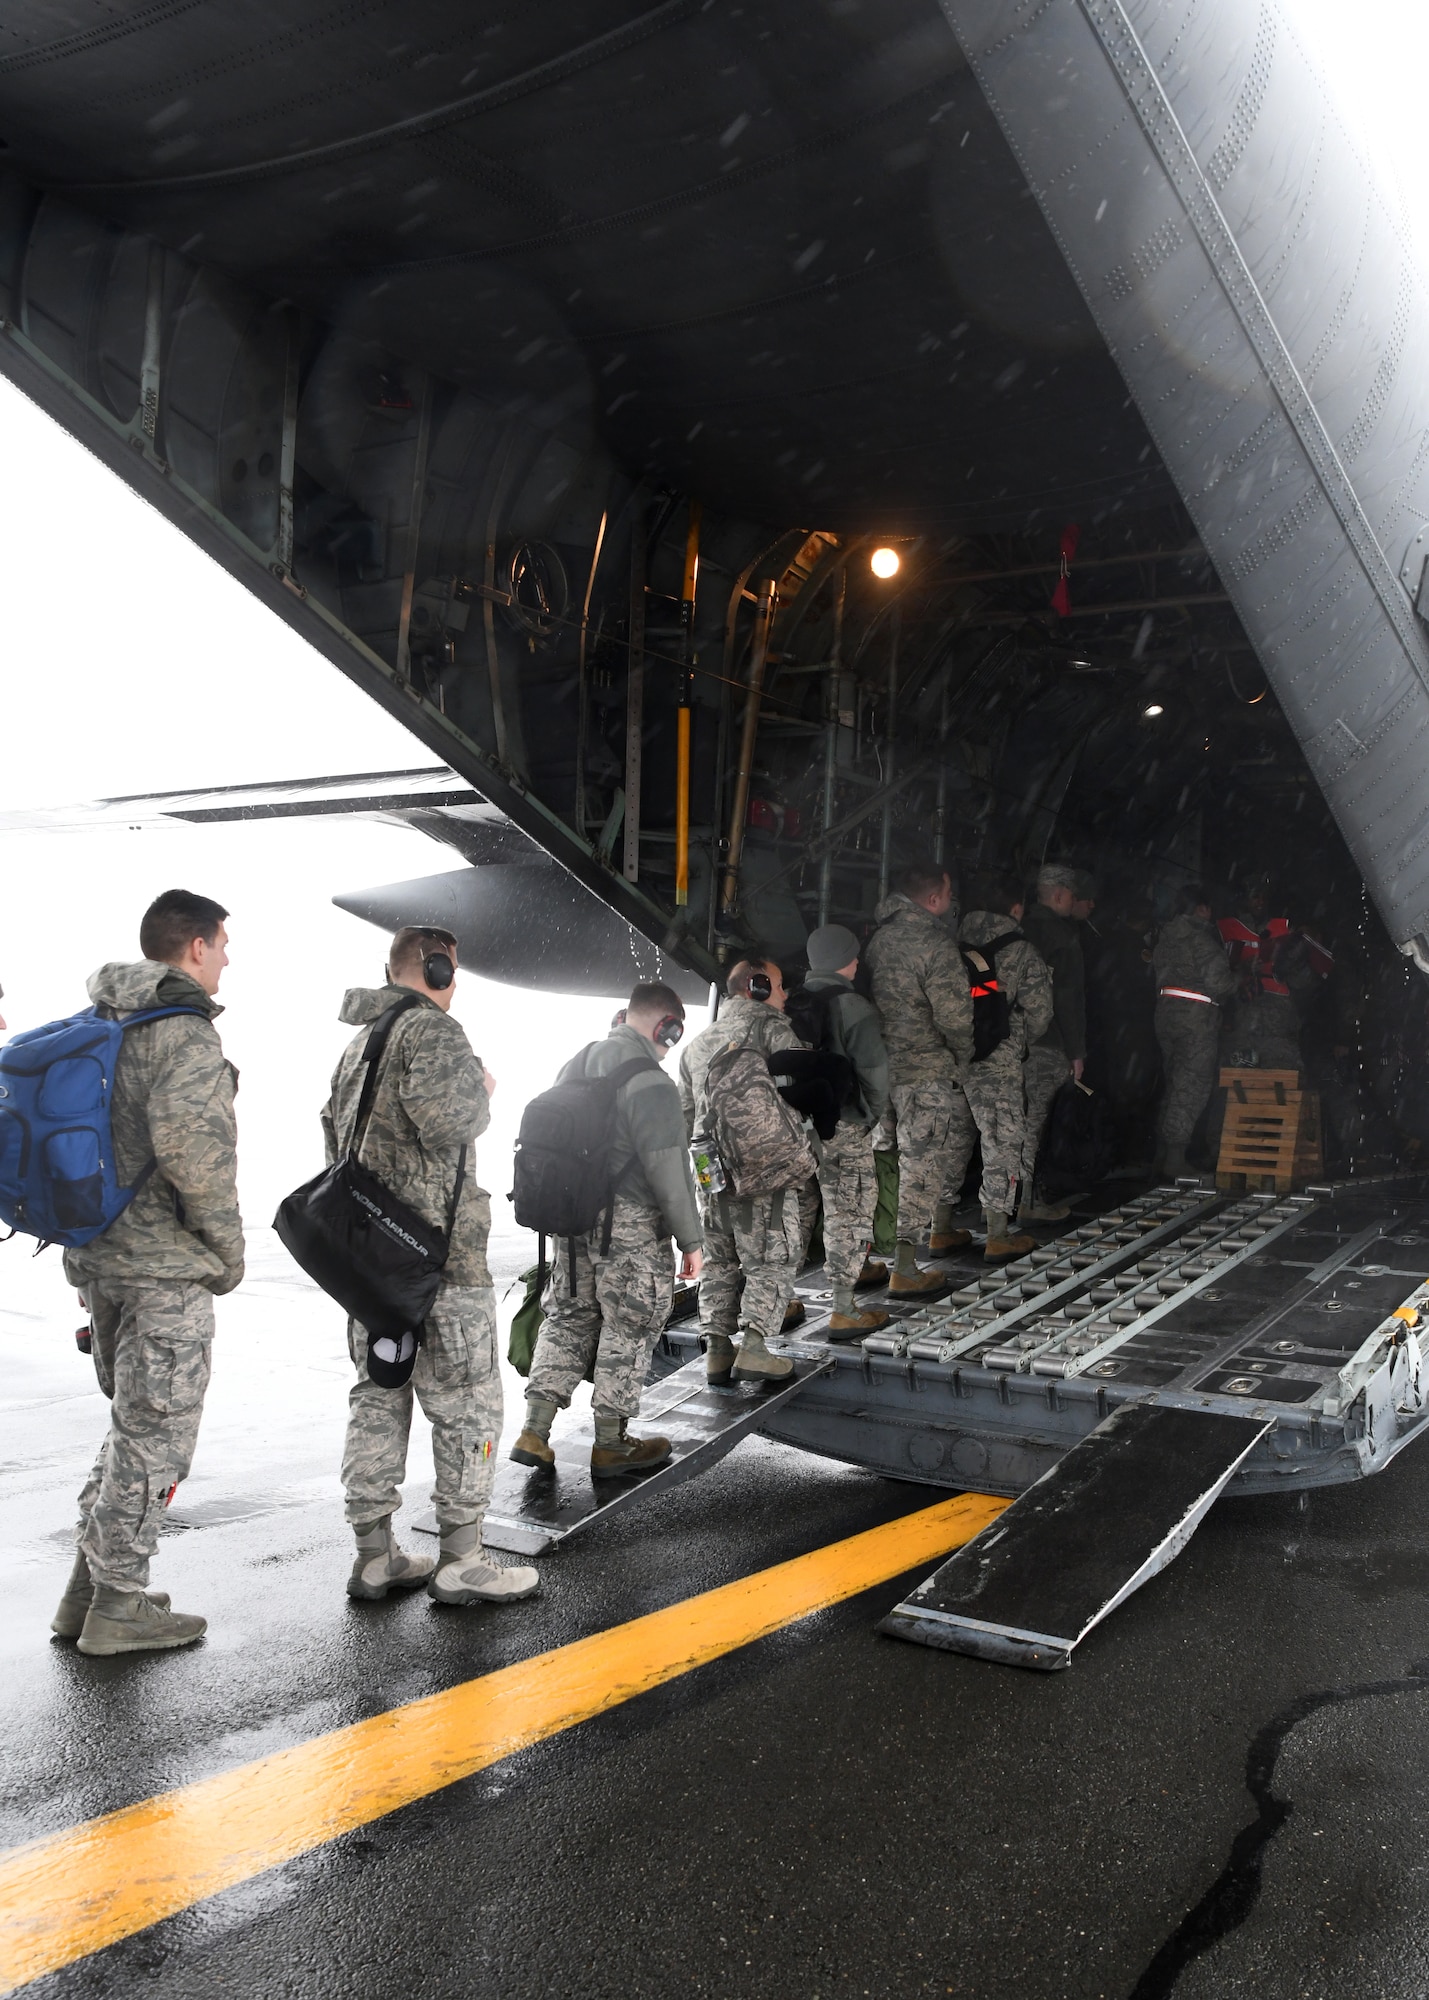 104th Fighter Wing Airmen board a C-130 Hercules Jan. 24, 2019, at Barnes Air National Guard Base, Massachusetts. The Airmen are going to Patrick Air Force Base where they will train to help them prepare for various situations.  (U.S. Air National Guard photos by Airman Sara Kolinski)